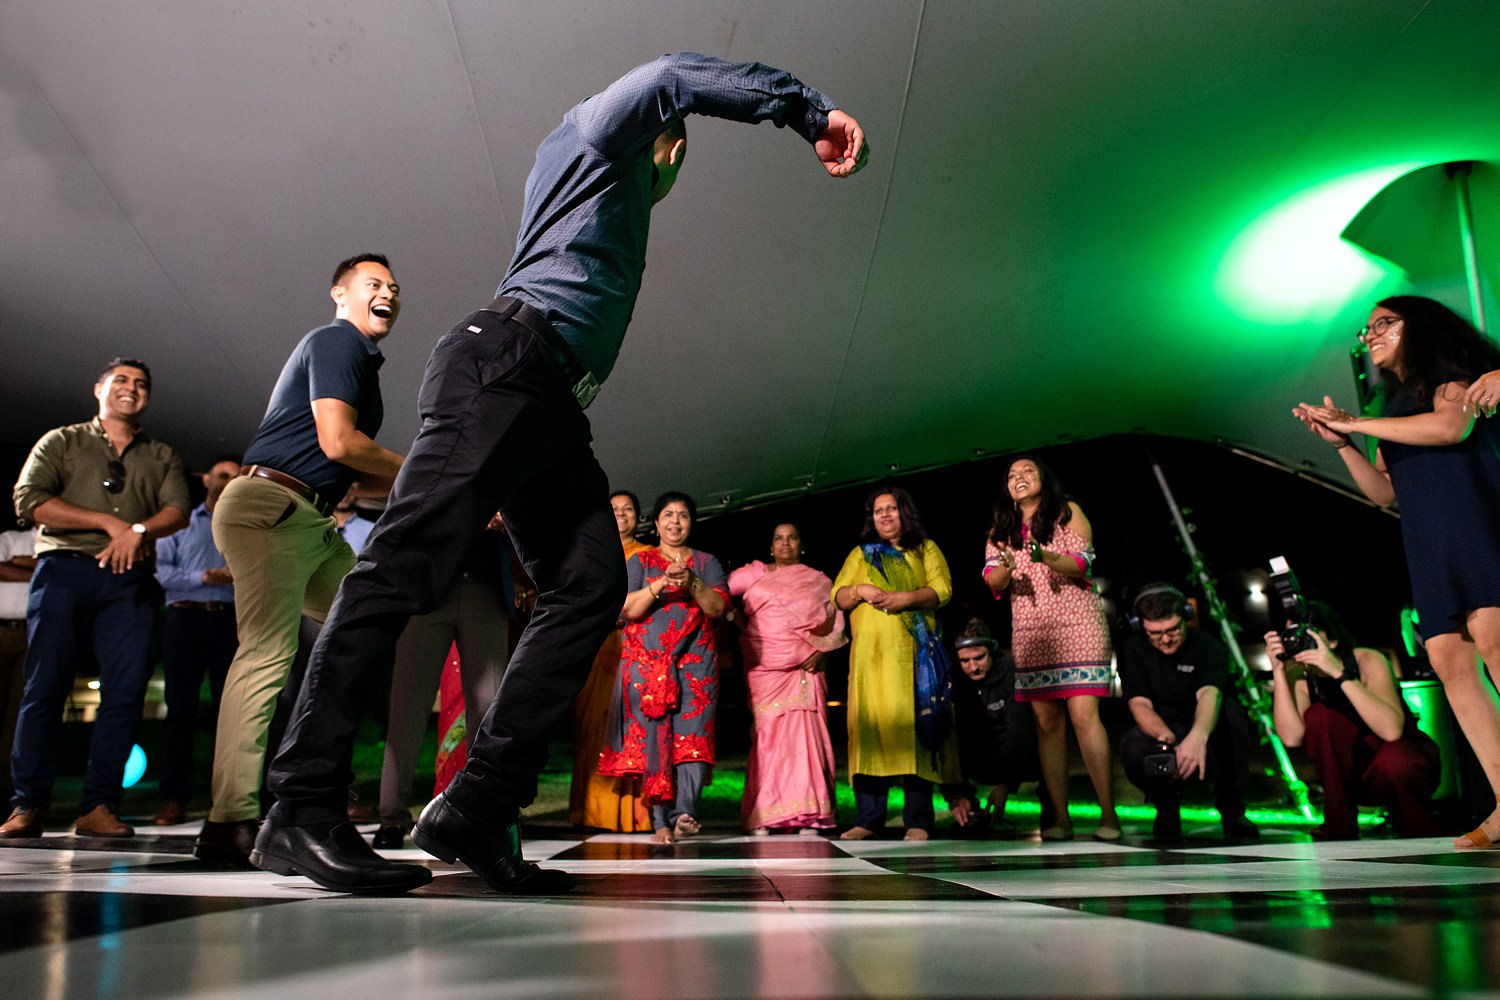 A wedding guest does the moonwalk on a checkered black and white dancefloor as other guests look on and clap 